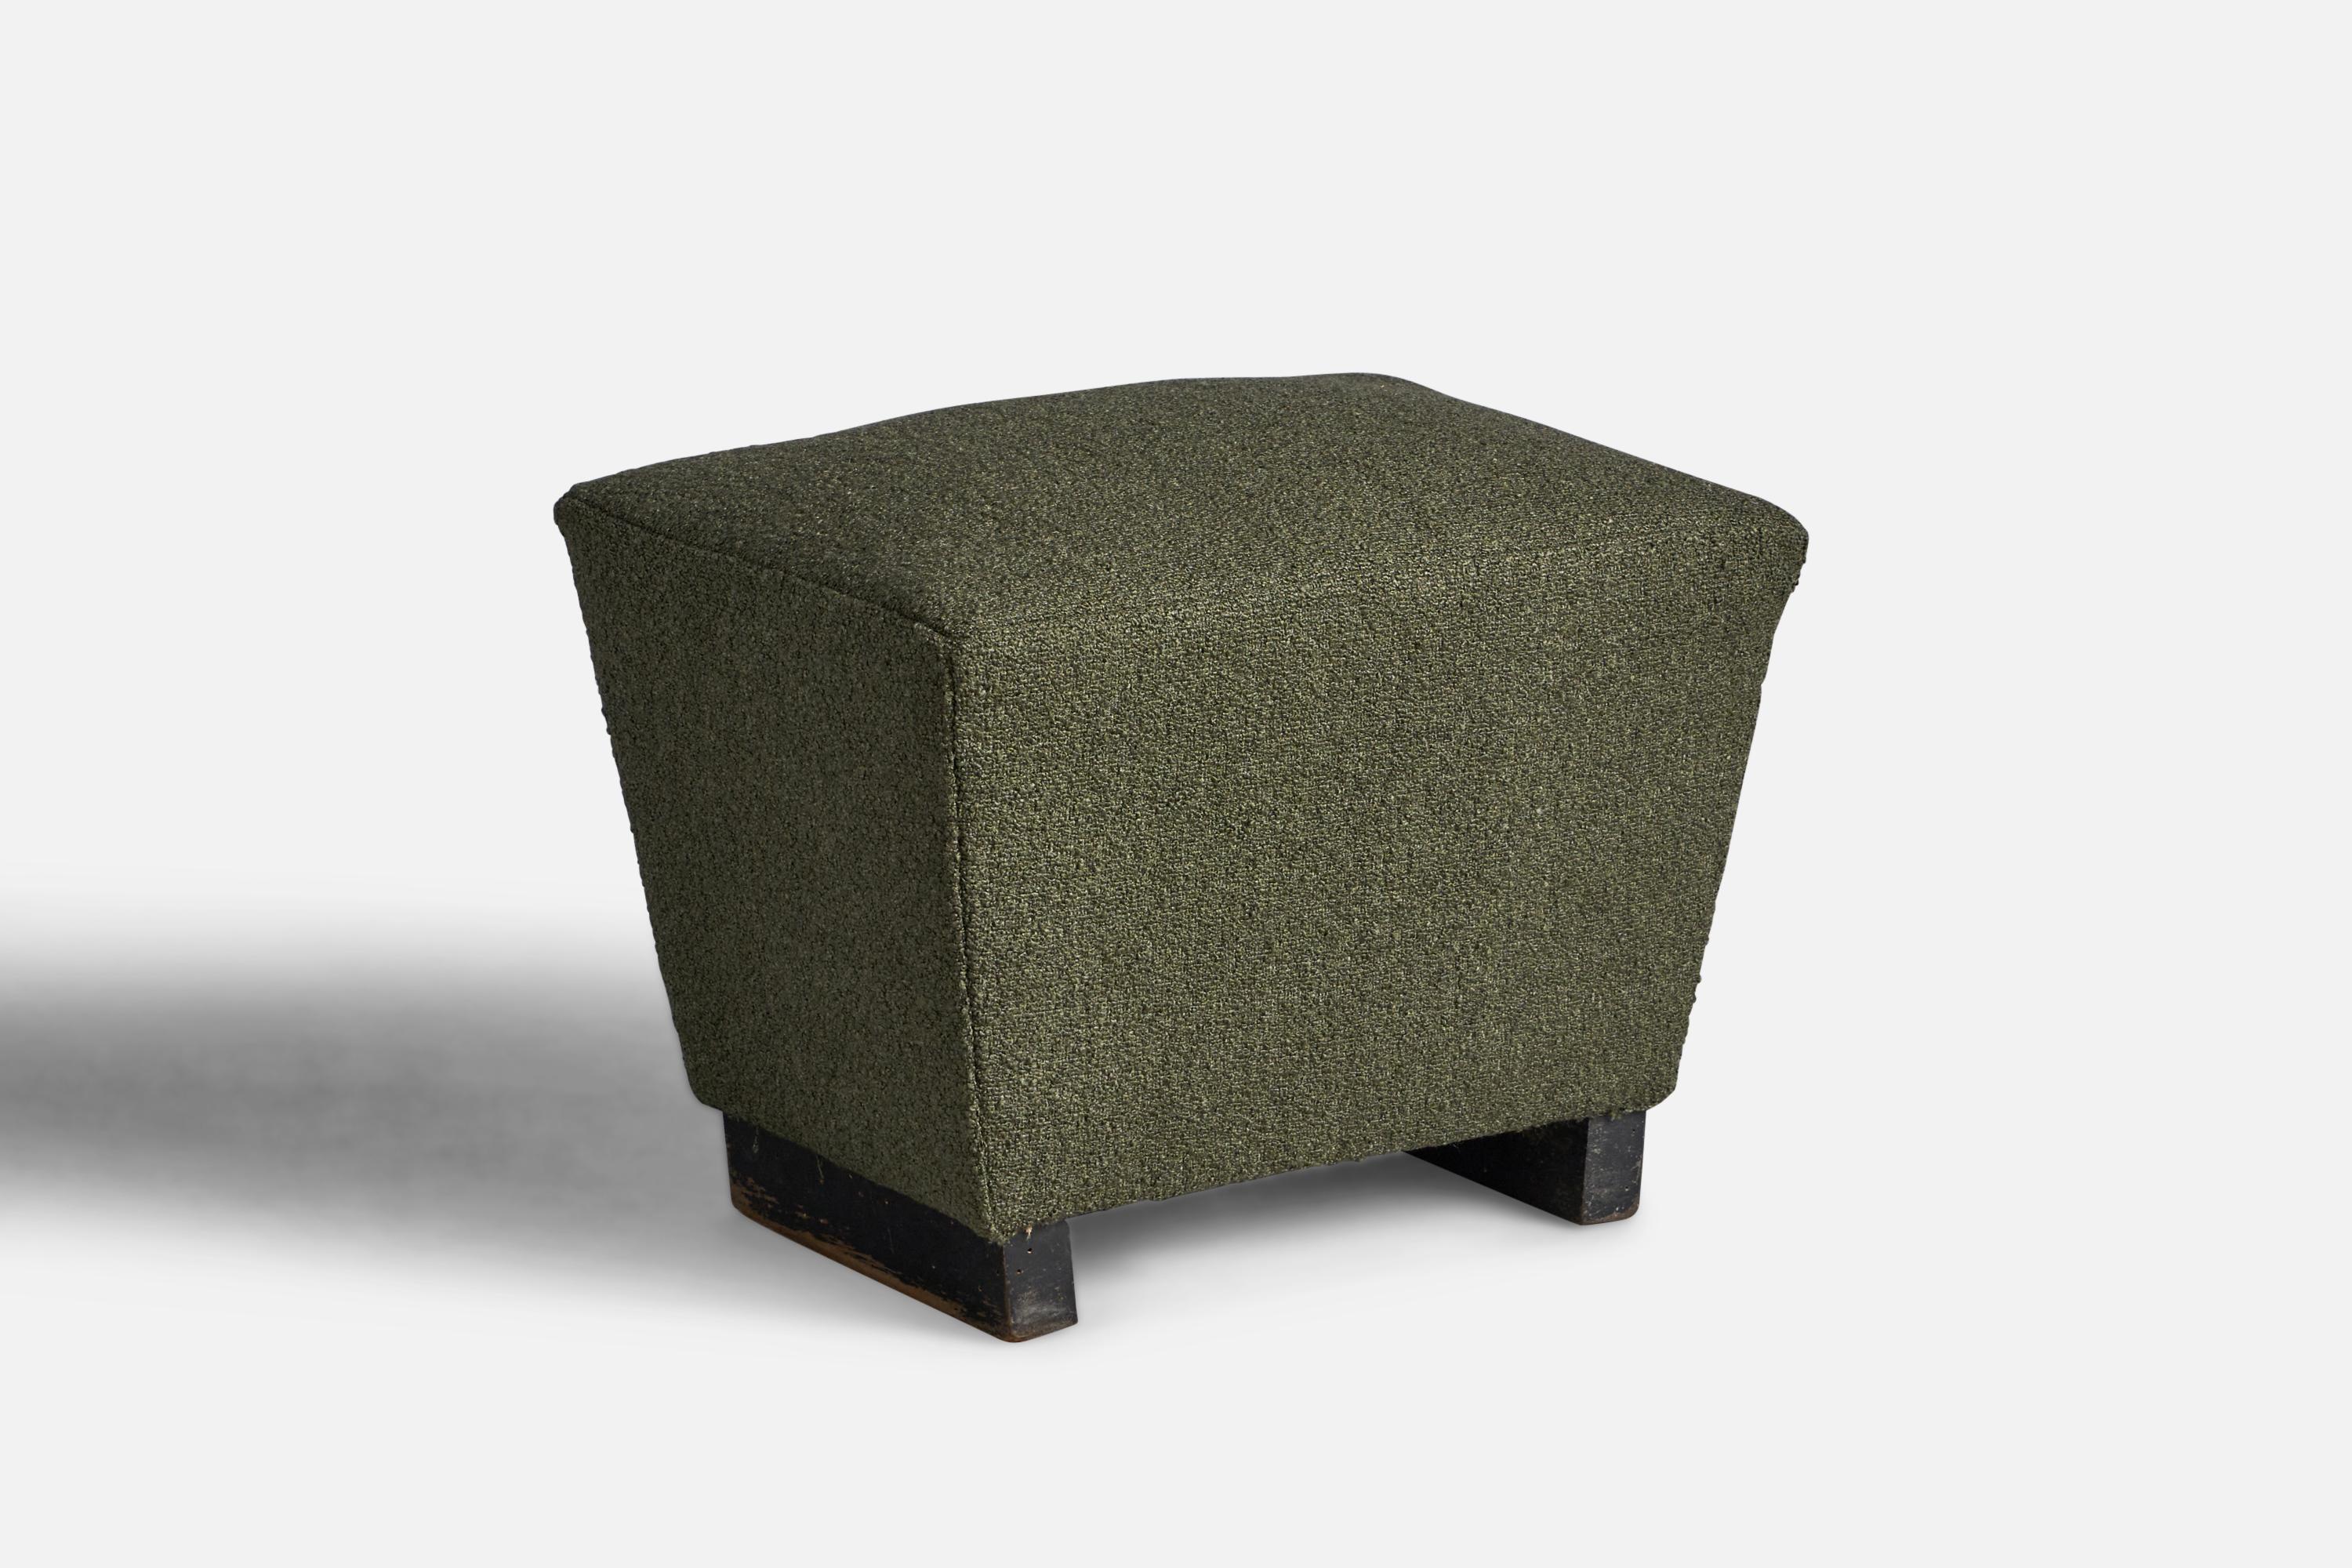 A black-lacquered wood and green bouclé fabric stool, designed and produced in Italy, 1930s.
Condition: Reupholstered in brand new bouclé fabric.